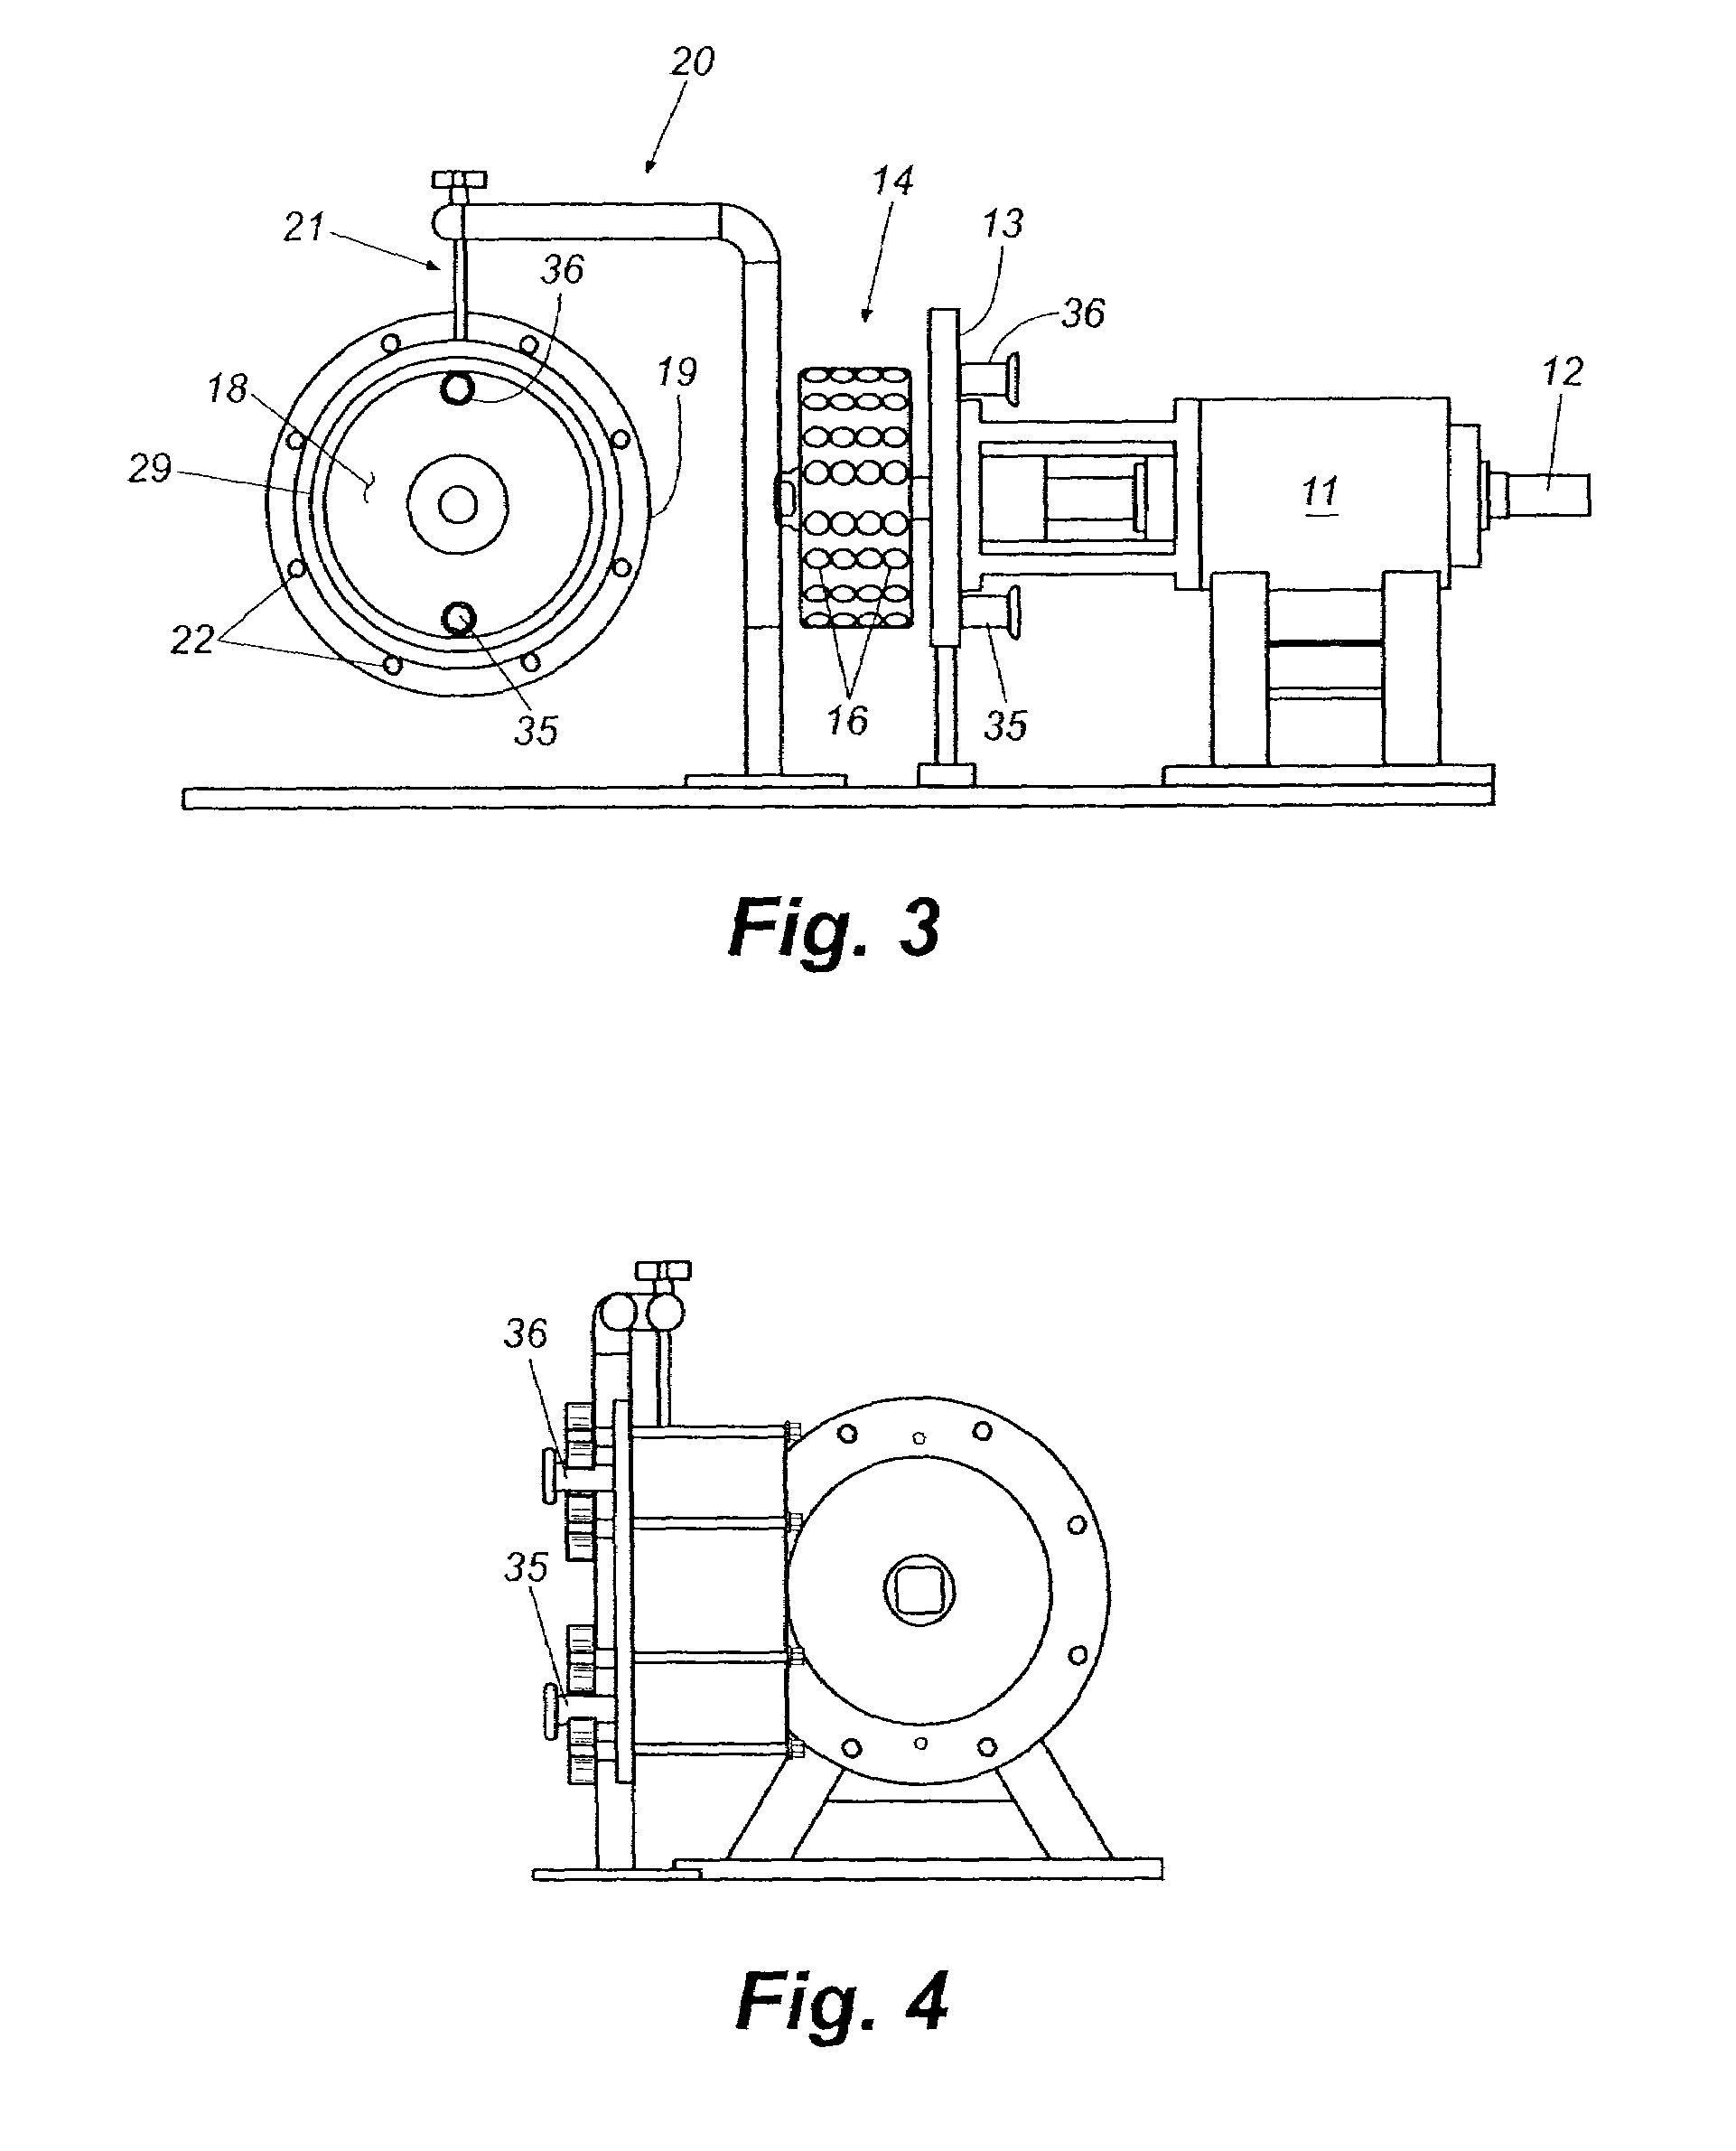 Controlled cavitation device with easy disassembly and cleaning